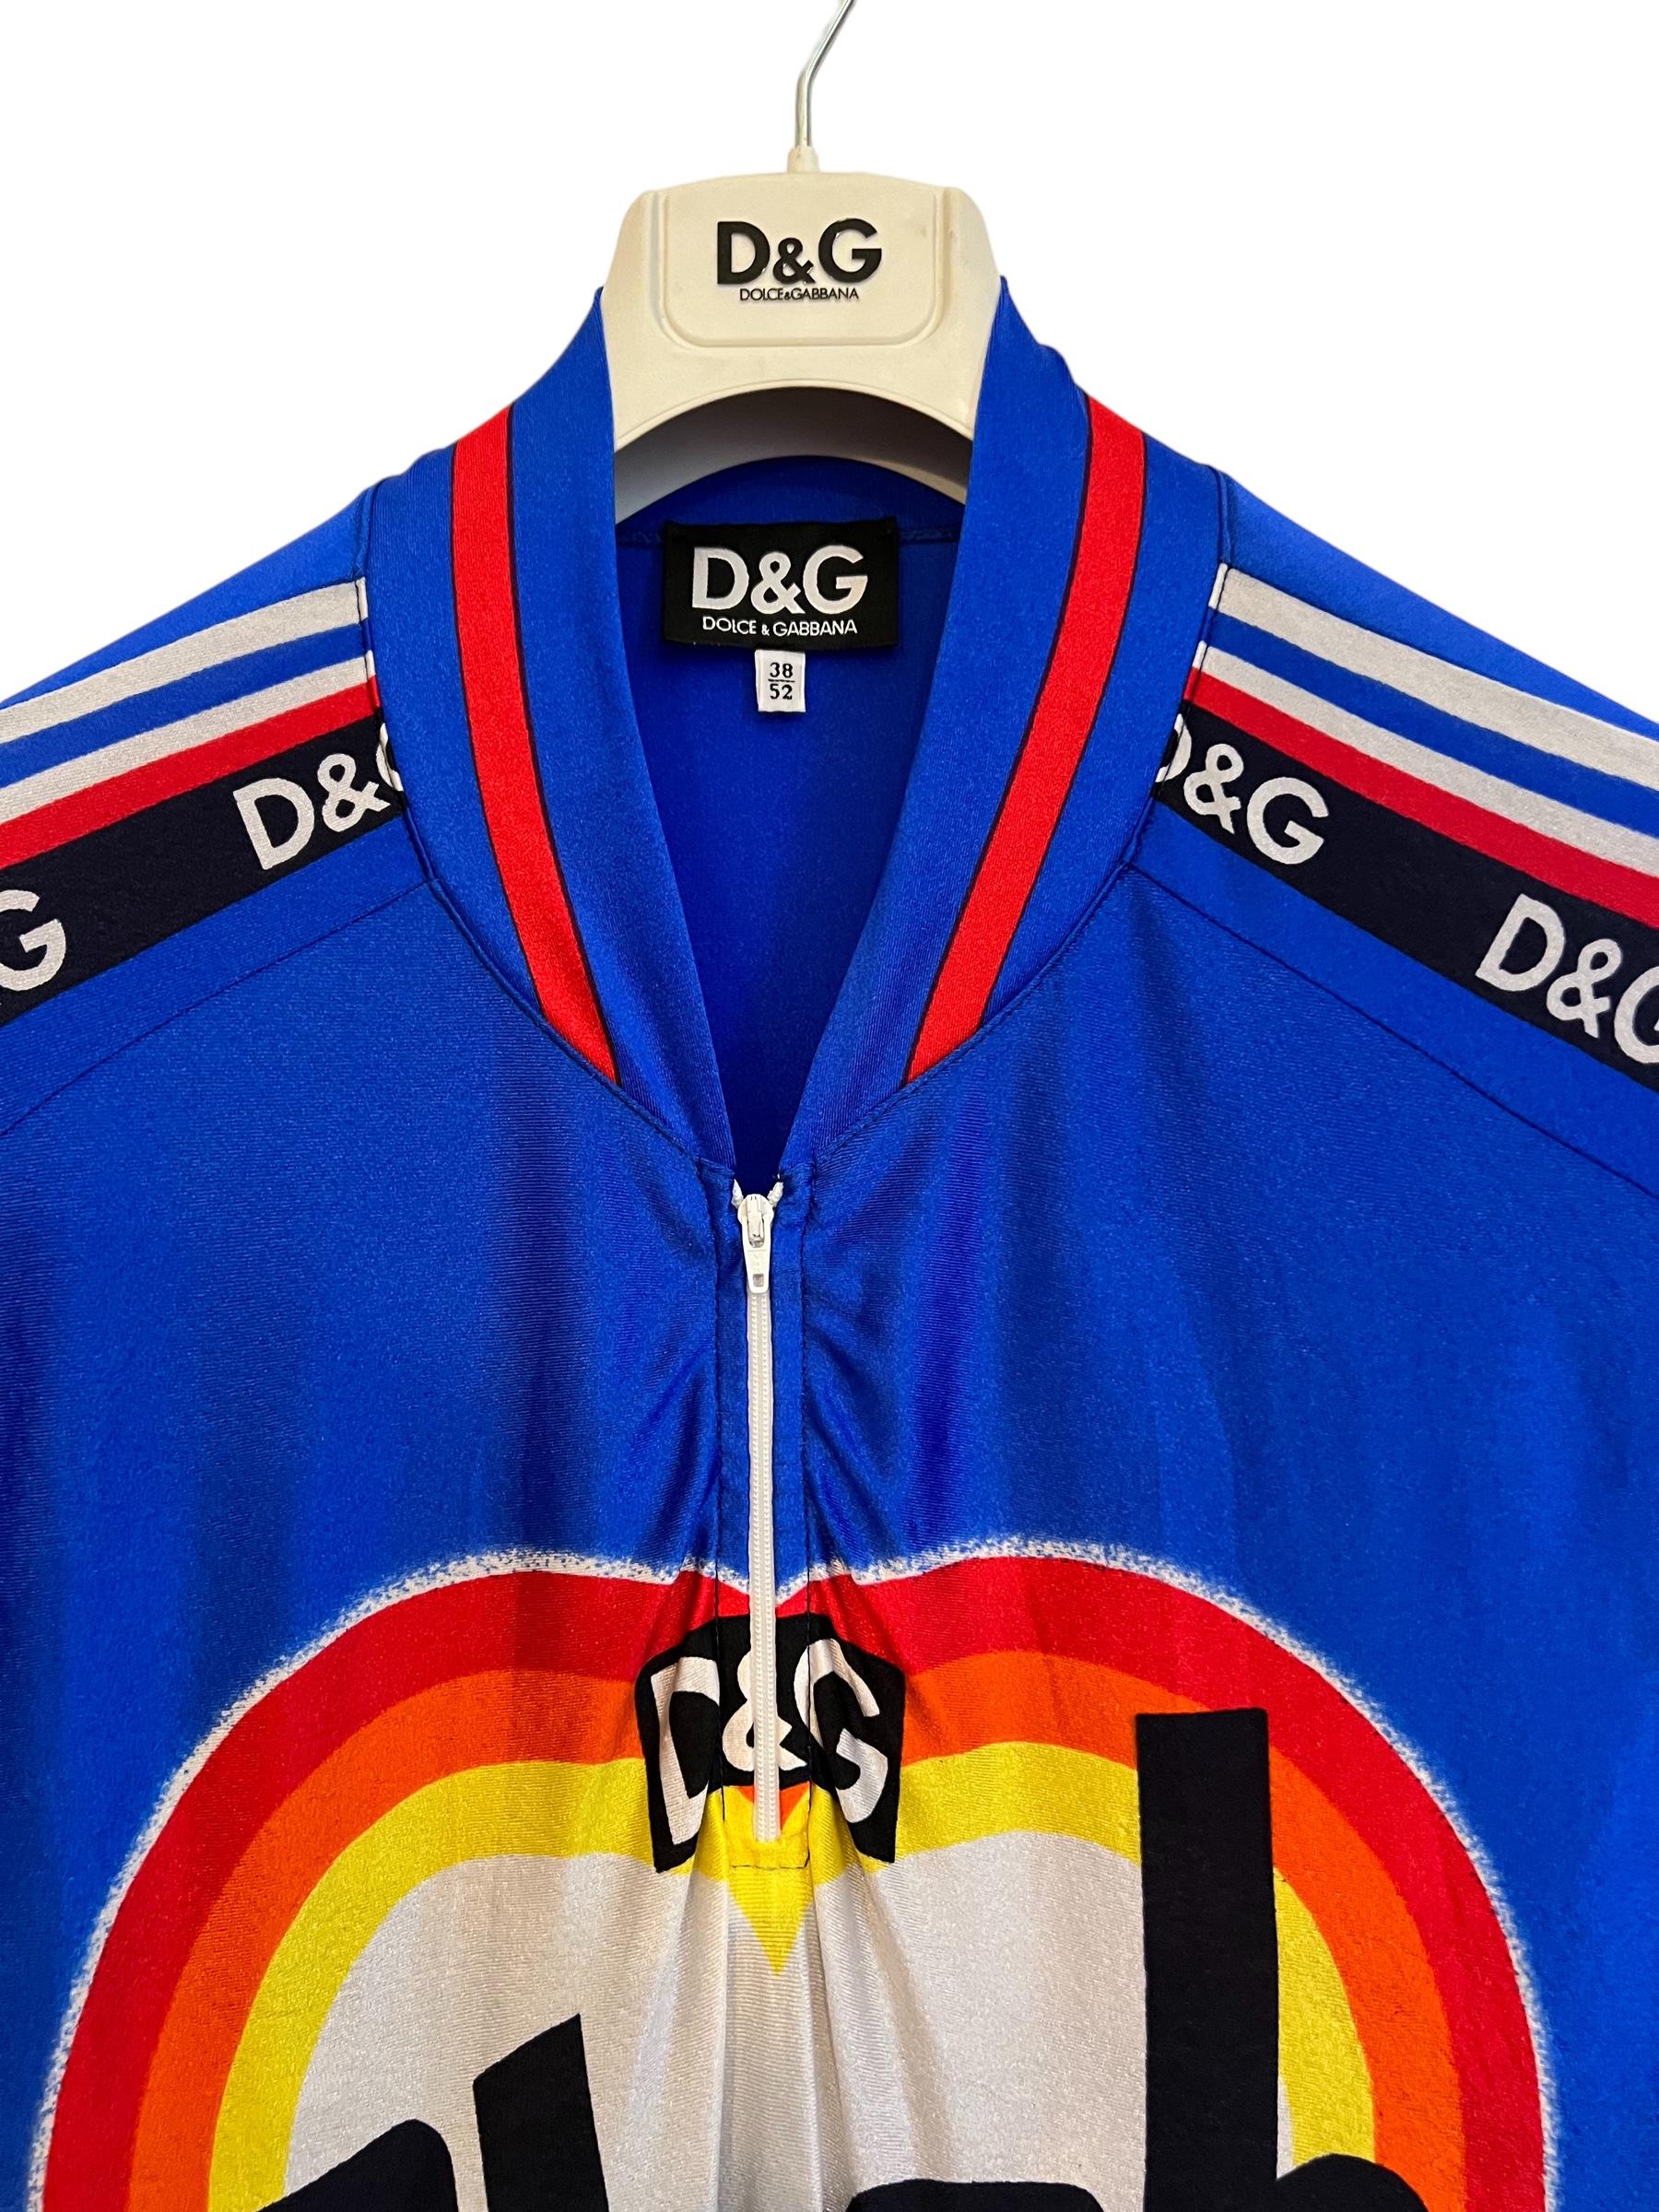 Superb, early 1990's Vintage Dolce & Gabbana Cycling Jersey style Top featuring Loud printed colouful imagery and Slogans.

MADE IN ITALY

Features:
Zip neckline
short sleeves

Sizing: 
Pit to Pit: 21